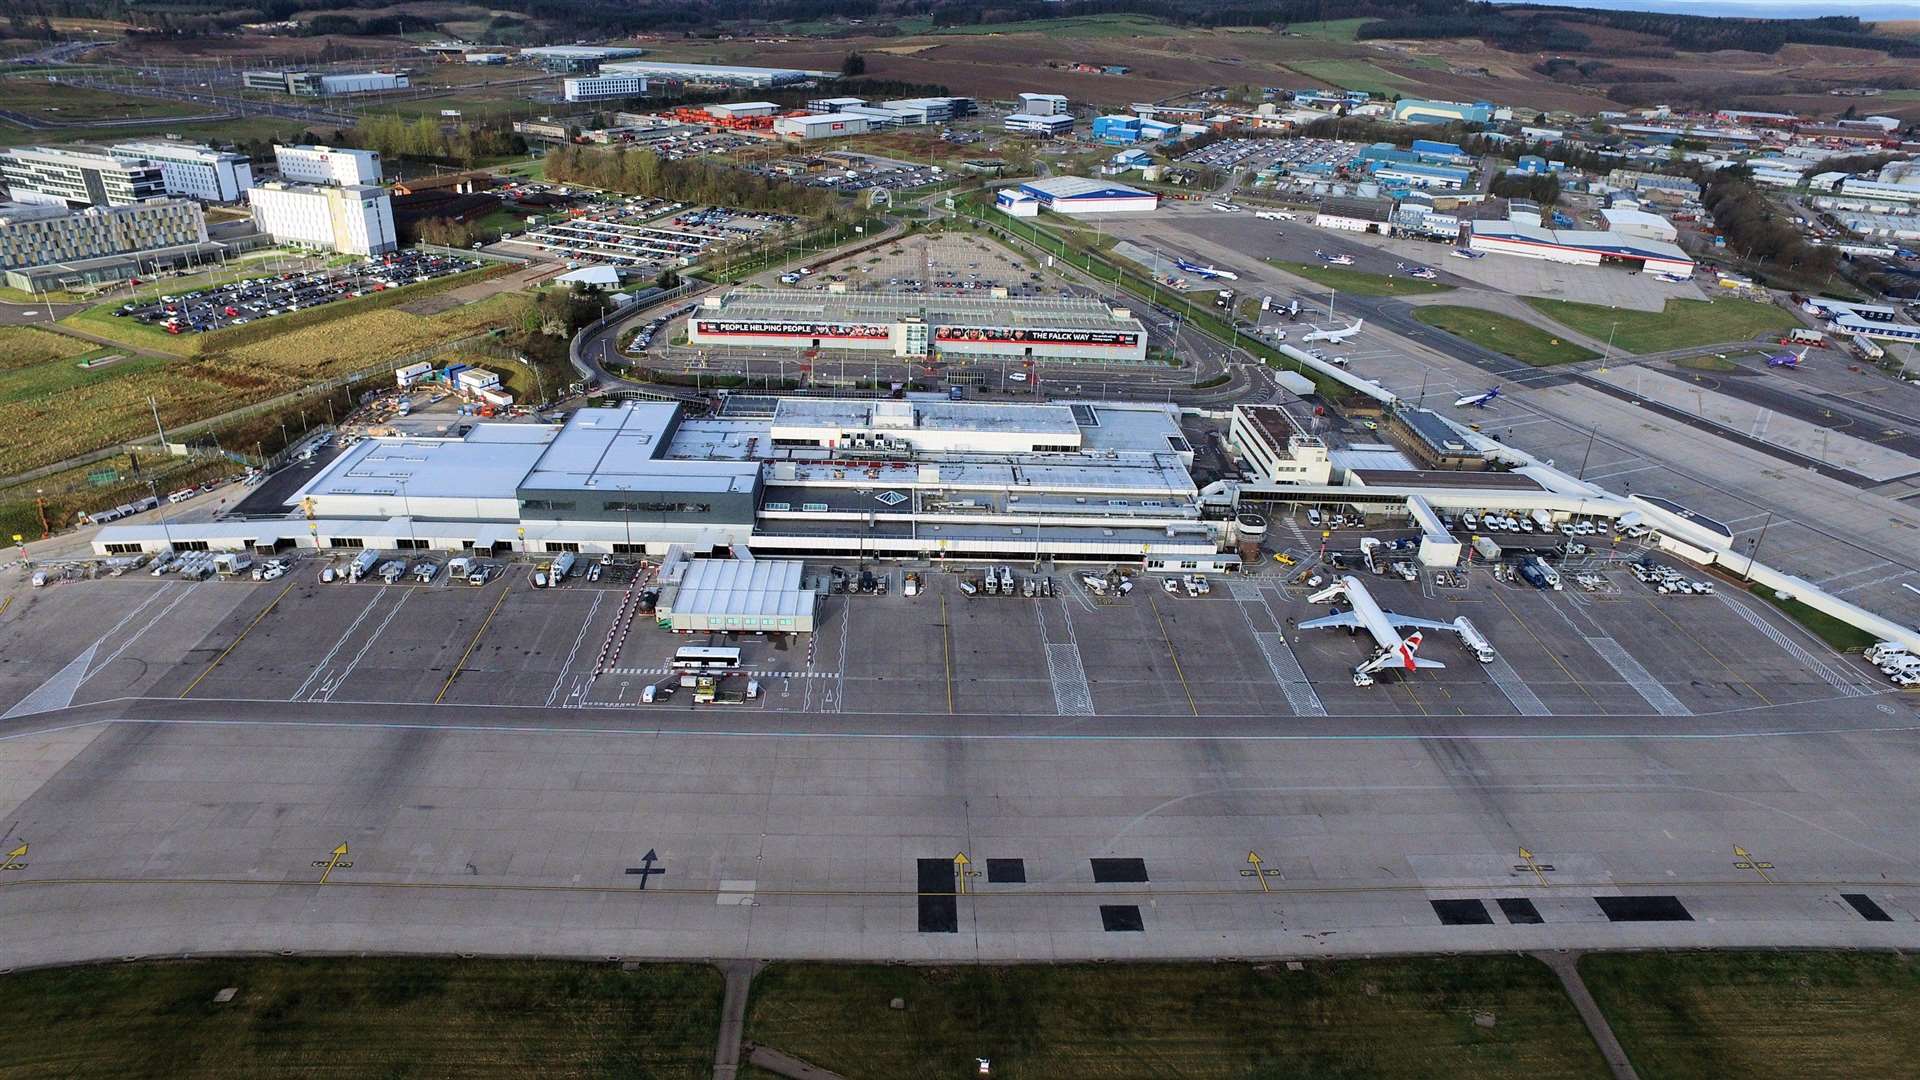 Air Passenger Duty which will make travel within the UK cheaper and support regional airports like Aberdeen.